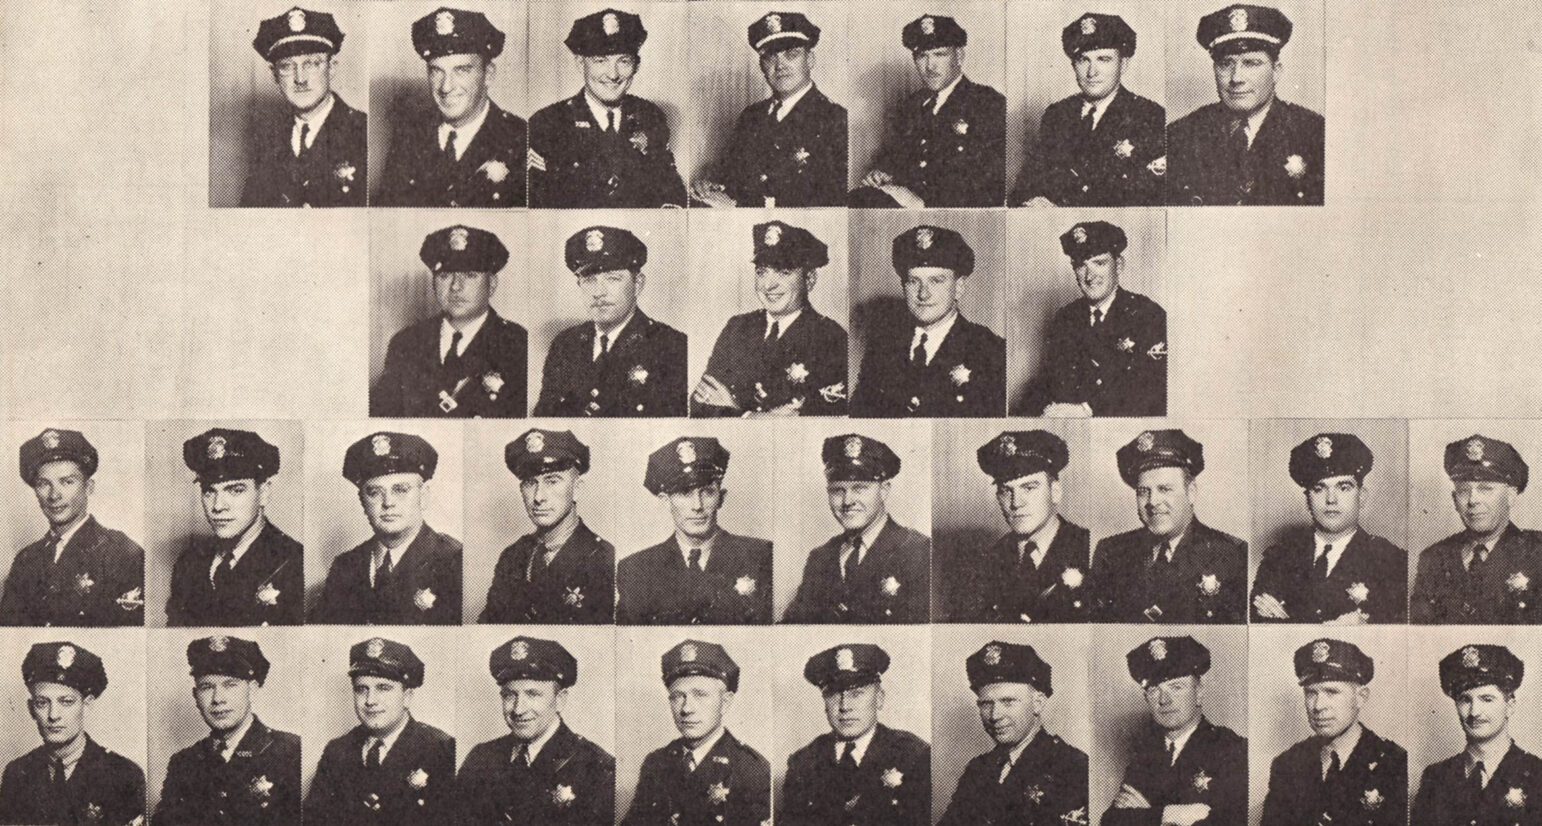 The Vallejo Police Department 1943 "yearbook photo" consisting of 32 portraits of officers and line supervisors, all white and all in uniforms with metal badges and police caps.